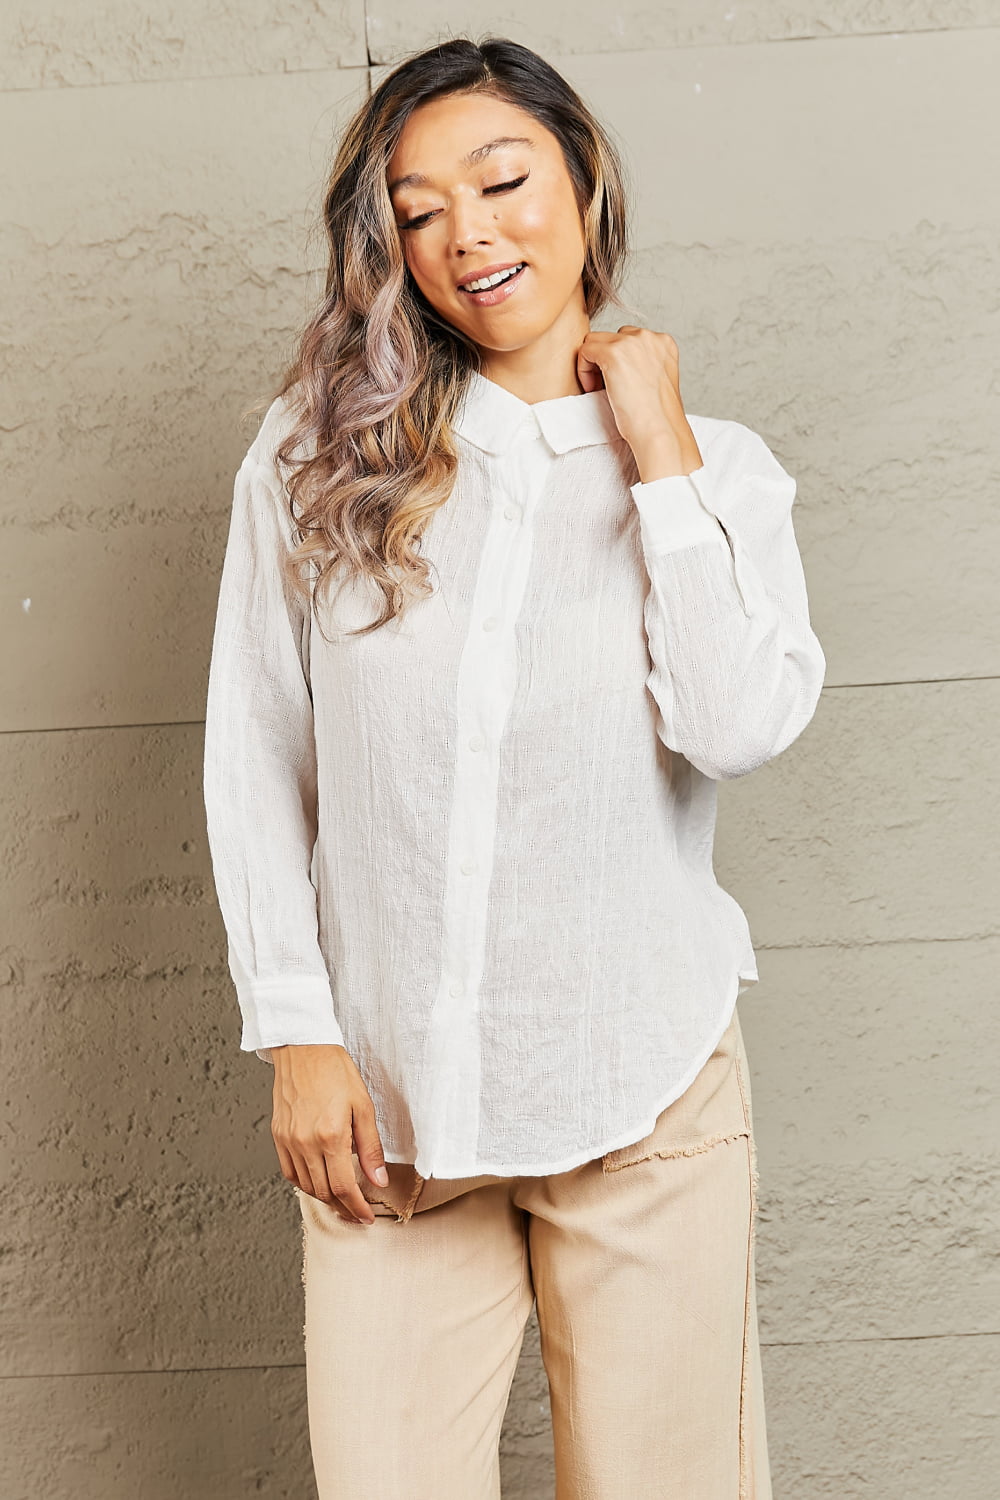 Petal Dew "Take Me Out" Lightweight Top